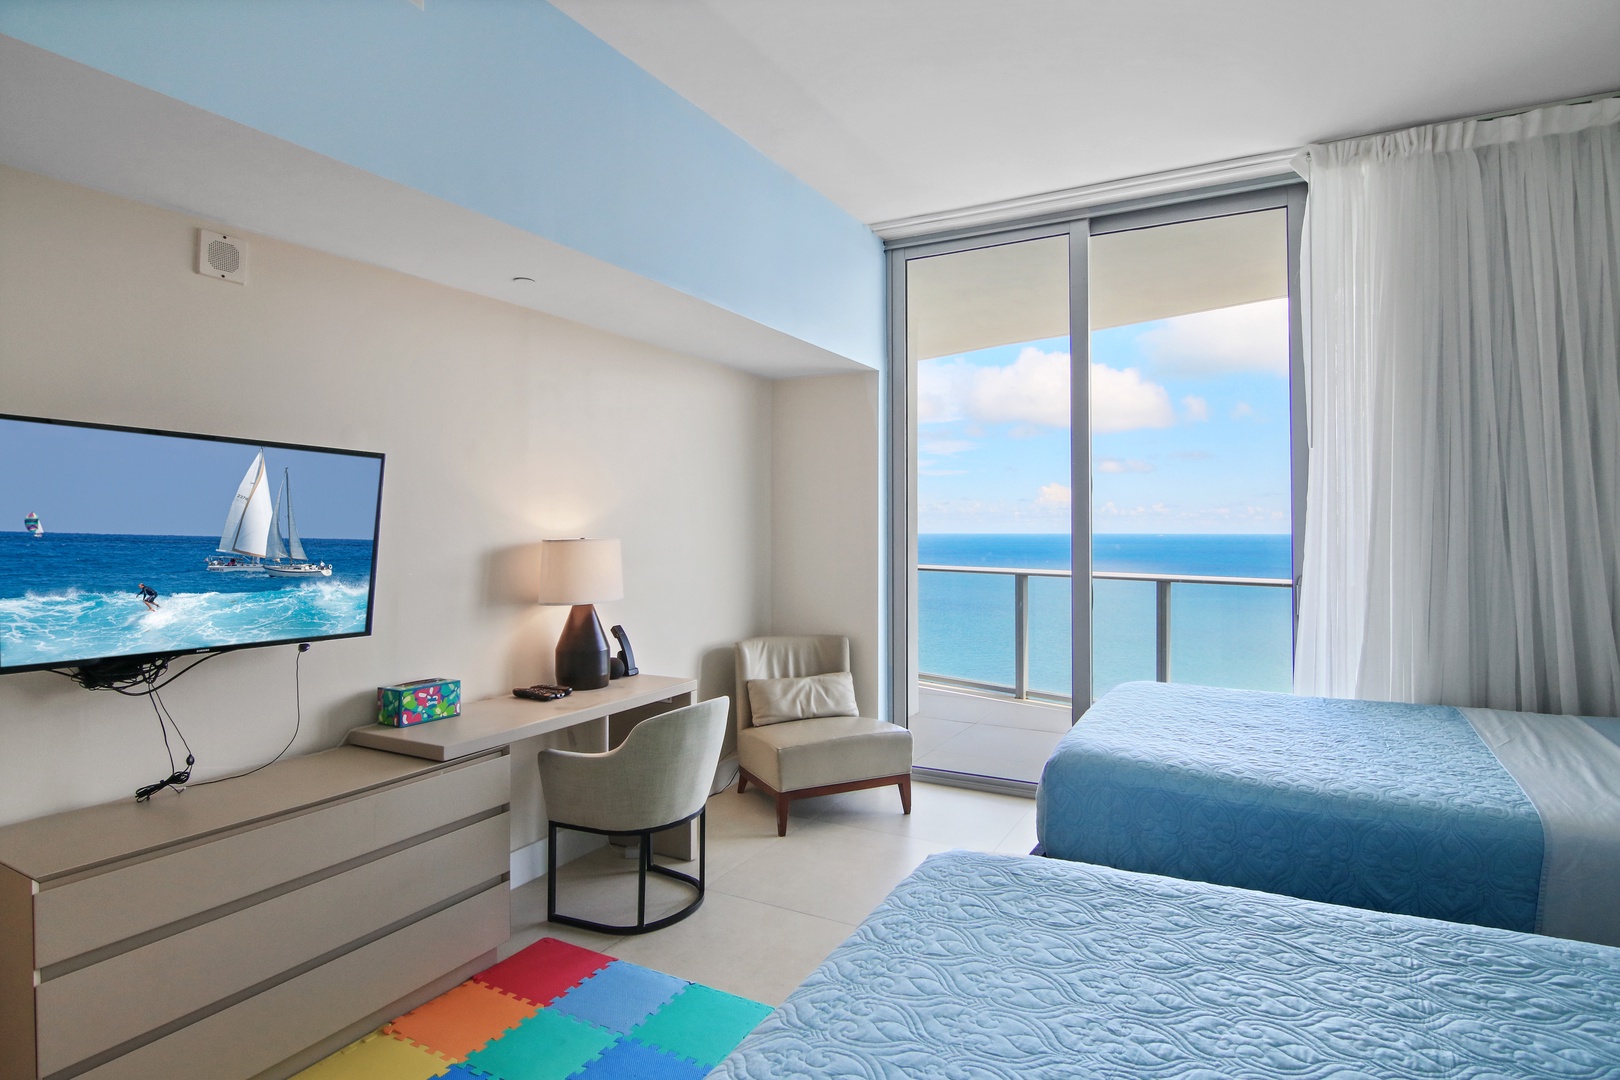 The 1st of 2 double queen bedrooms offers a Smart TV, desk, & balcony access